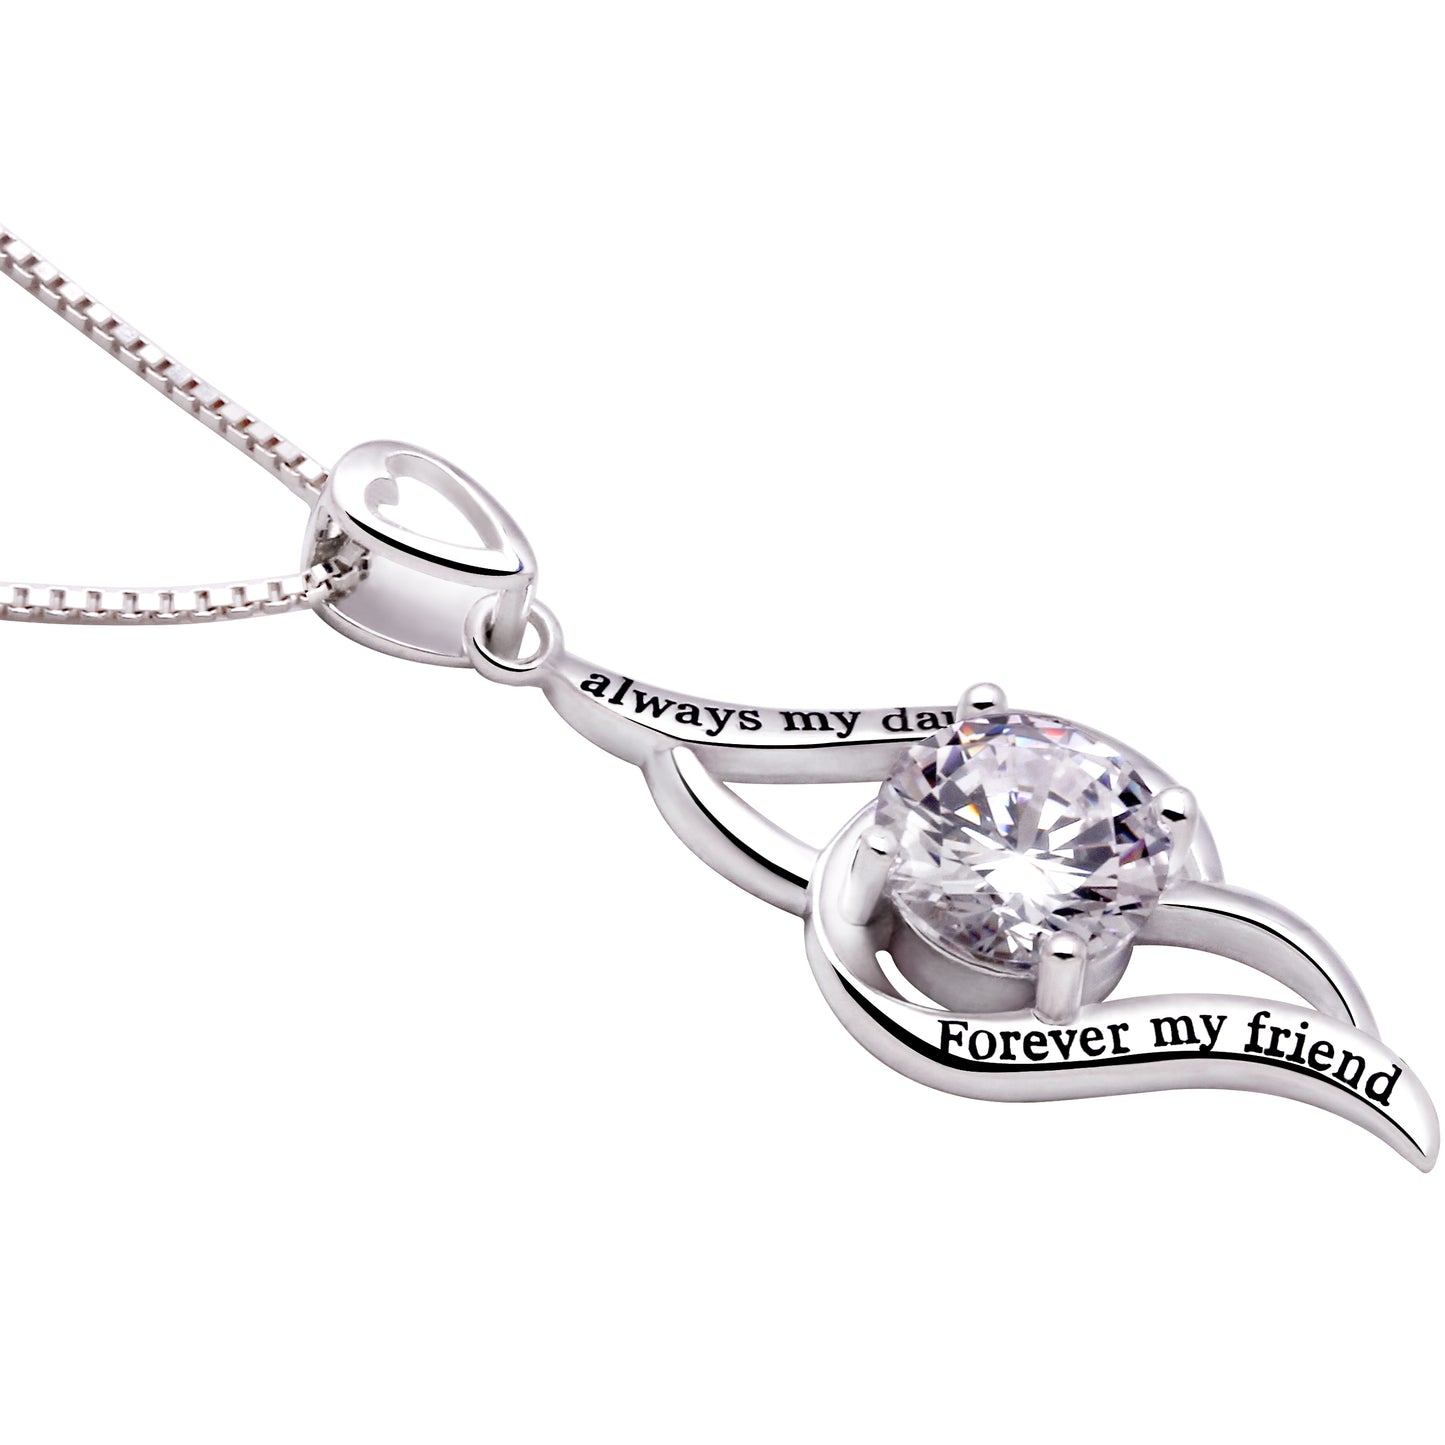 "always my daughter forever my friend" ALOV Jewelry Silver Cubic Zirconia Love Pendant Necklace